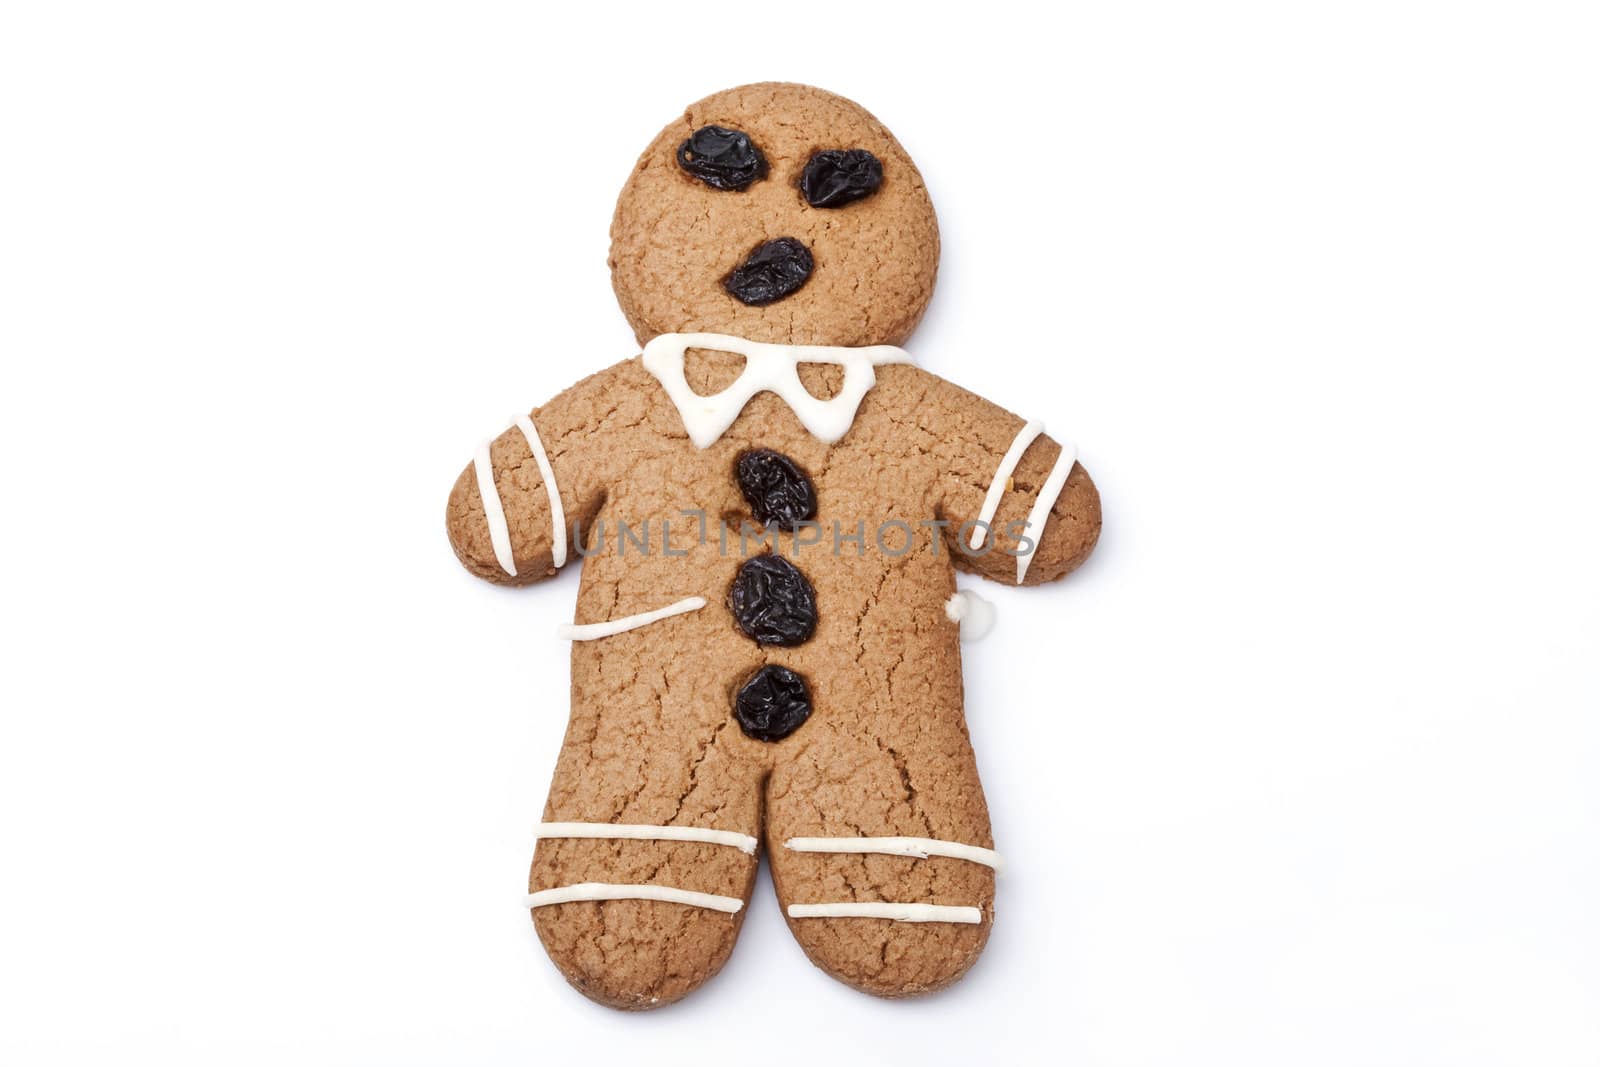 Gingerbread man by posterize